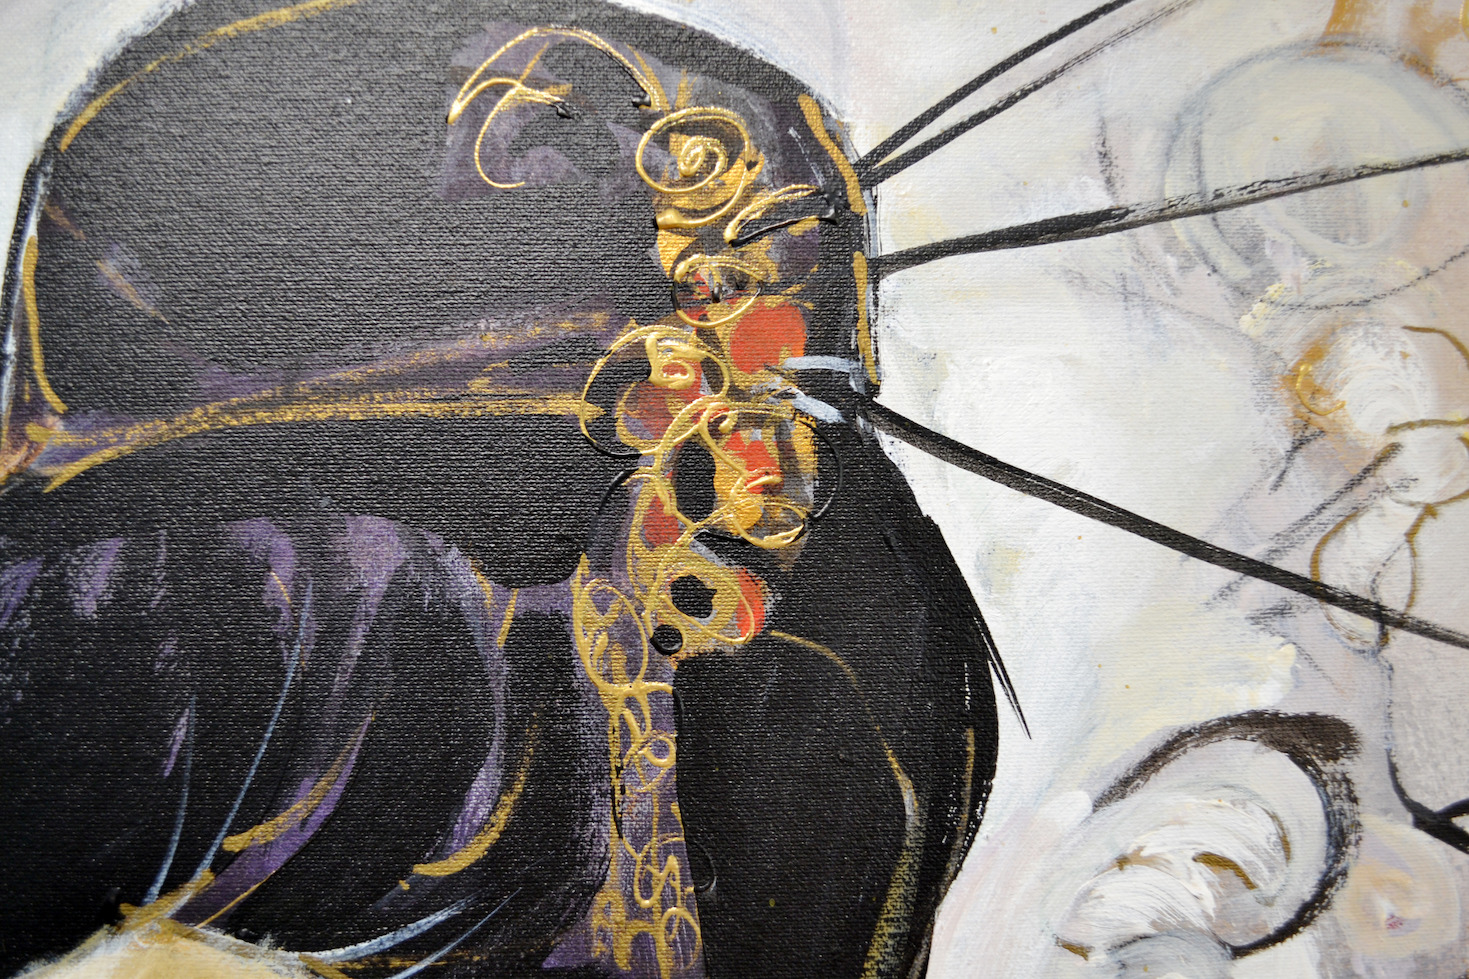 Close Up Detail 2 Of Mixed Media Painting "Geisha Reflection" By Lucette Dalozzo